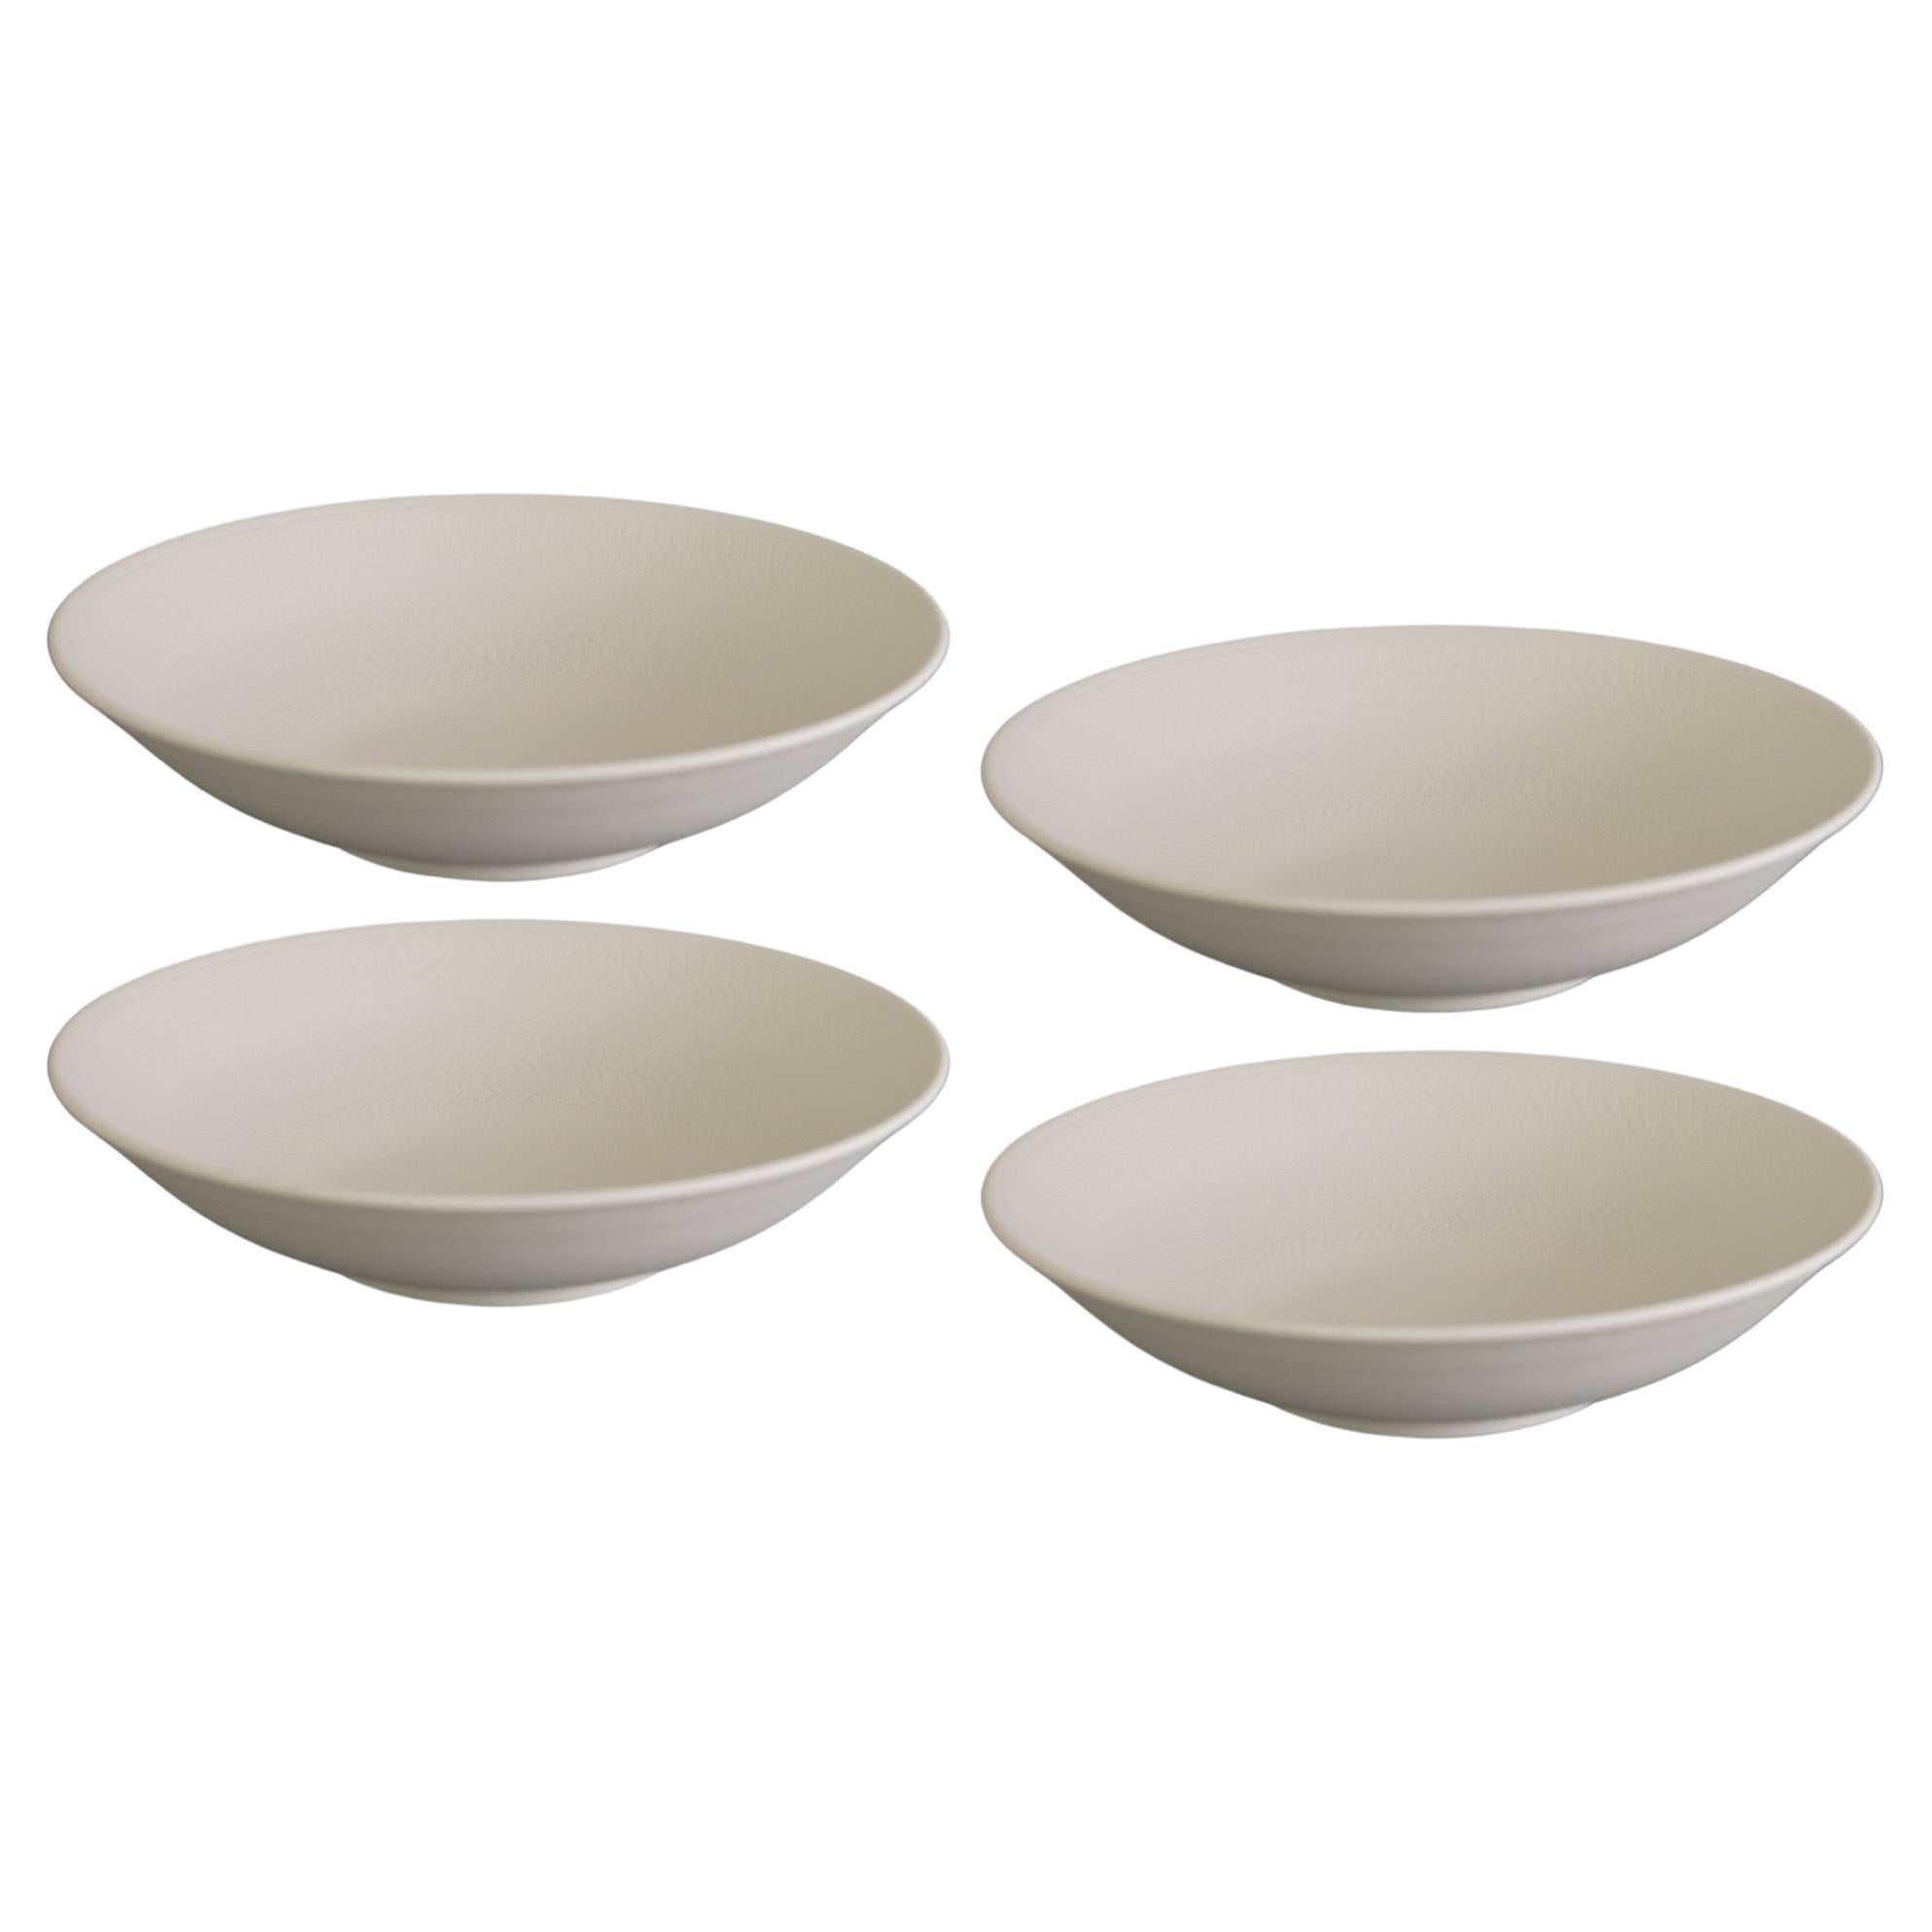 Set of 4 Helice Fruit Bowls by Studio Cúze